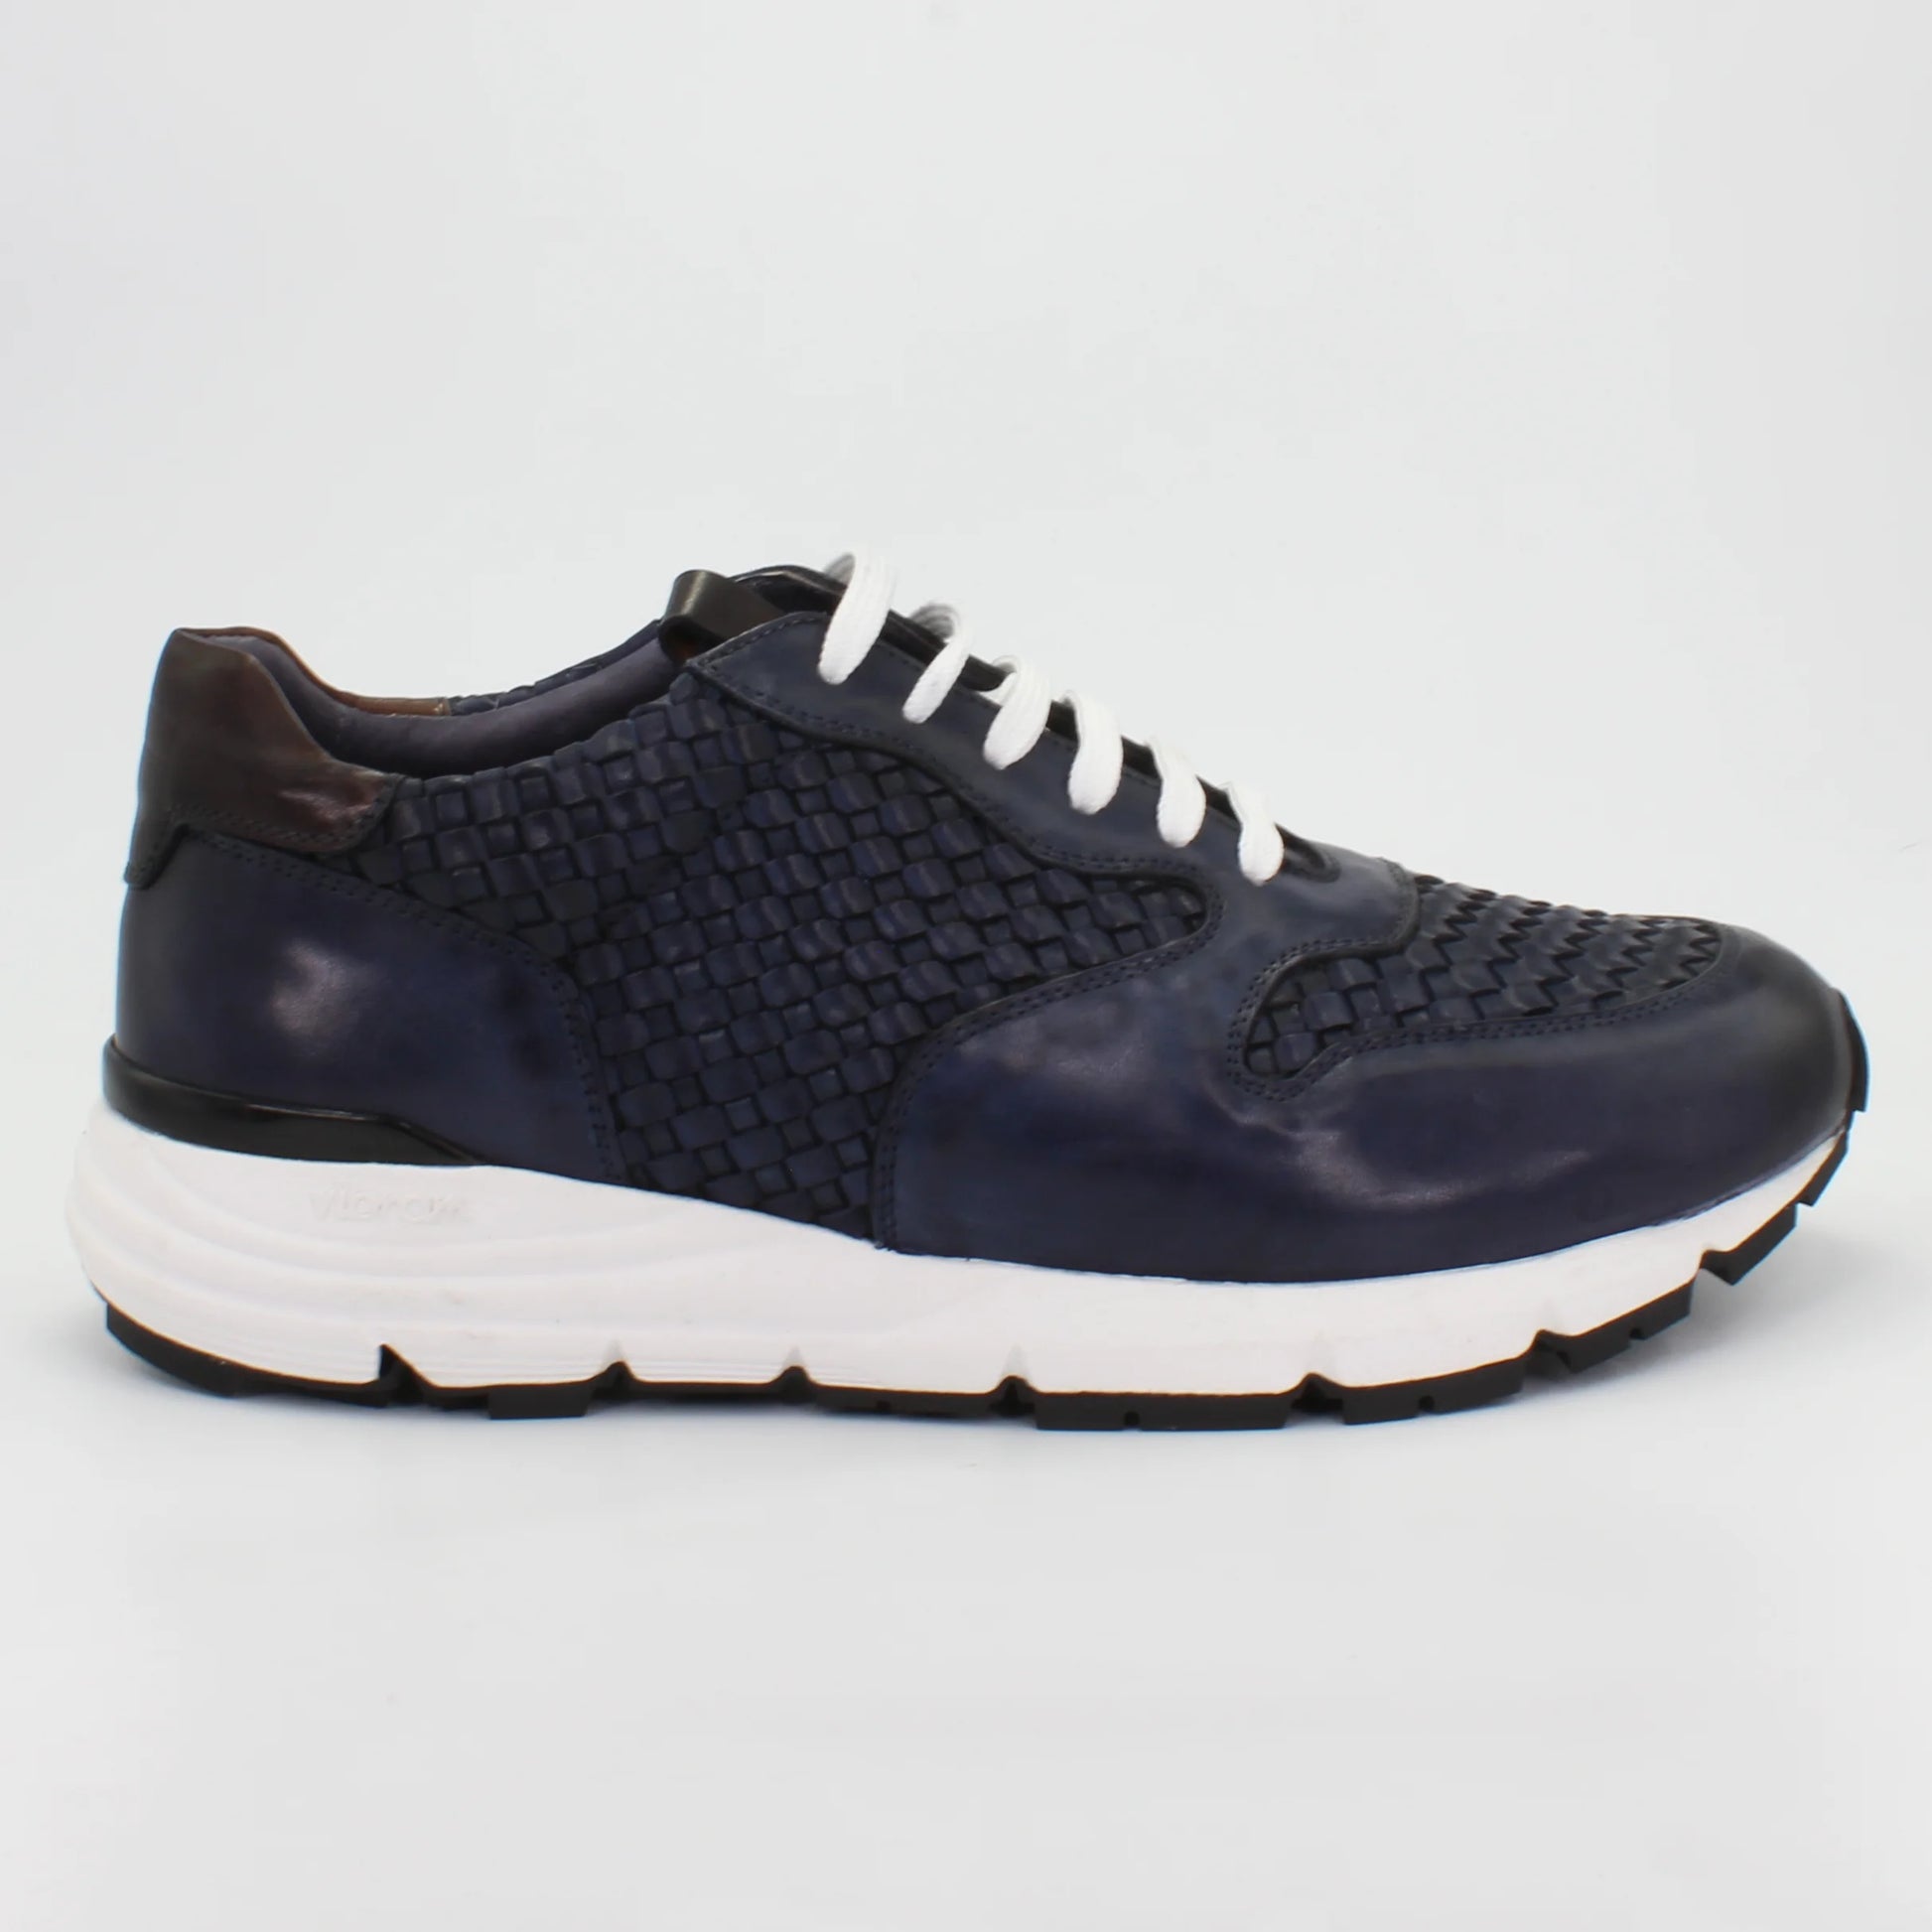 Shop Handmade Italian Leather woven sneaker in navy blue (BRU11375) or browse our range of hand-made Italian shoes for men in leather or suede in-store at Aliverti Cape Town, or shop online. We deliver in South Africa & offer multiple payment plans as well as accept multiple safe & secure payment methods.